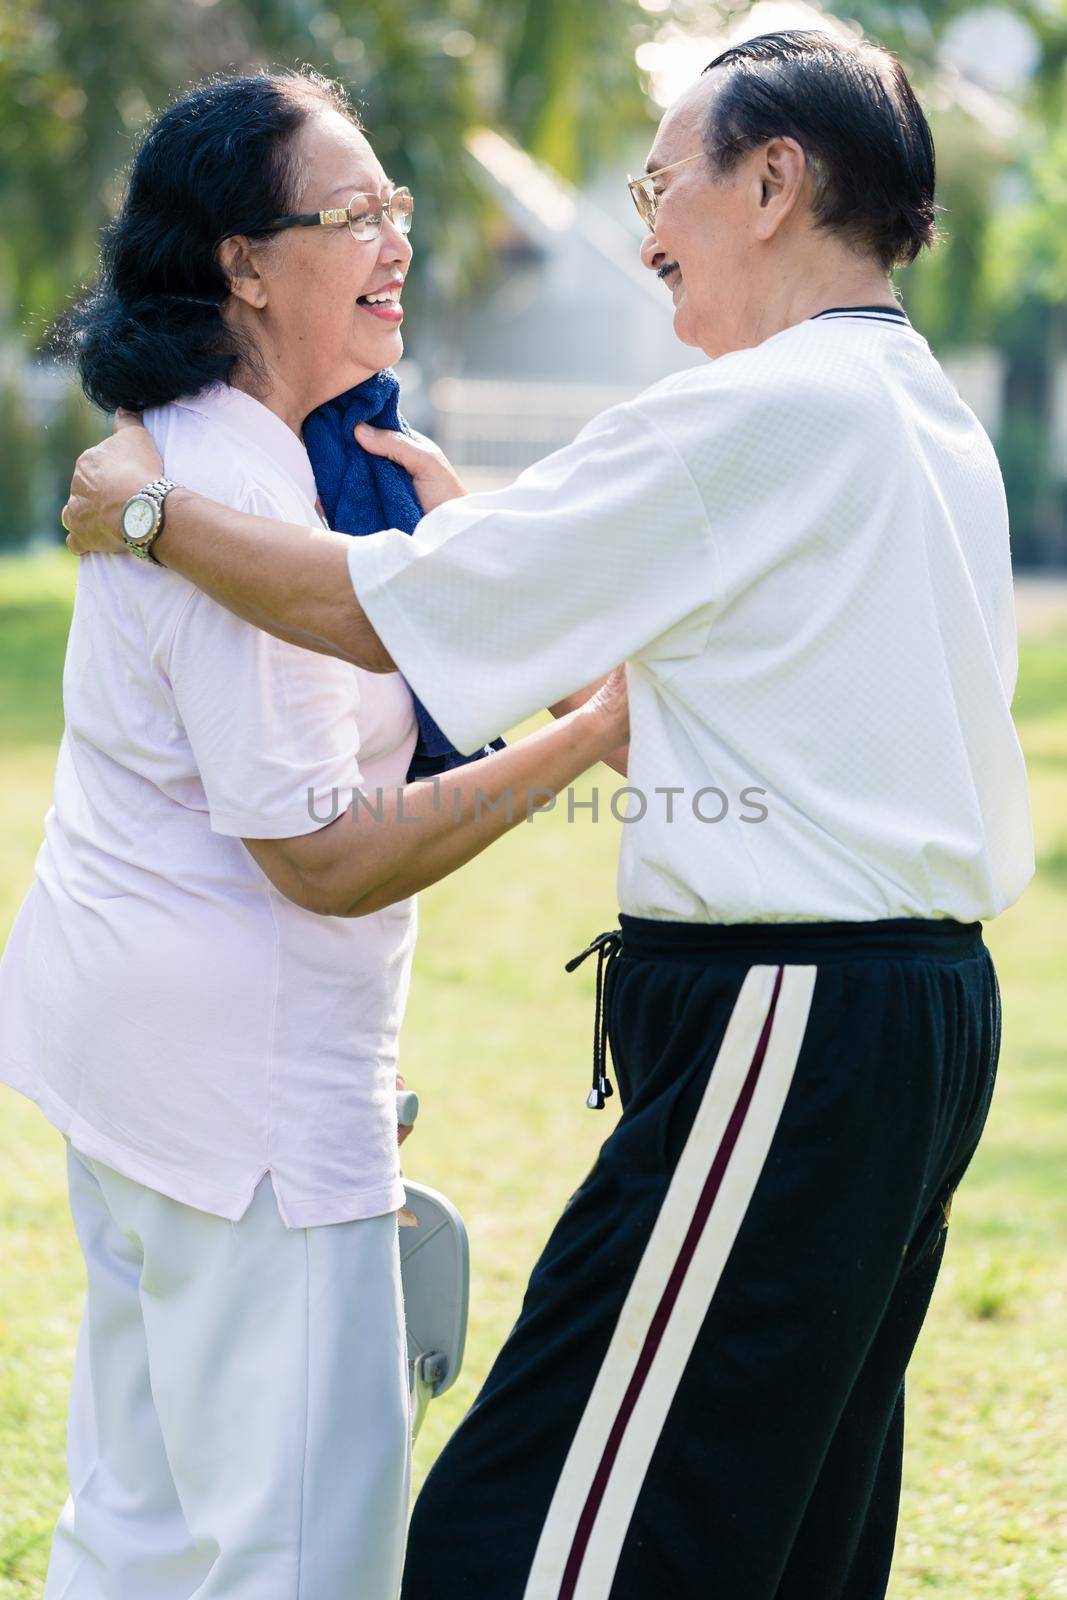 An elderly man wipe the sweat from his wife's face with towel by Kzenon